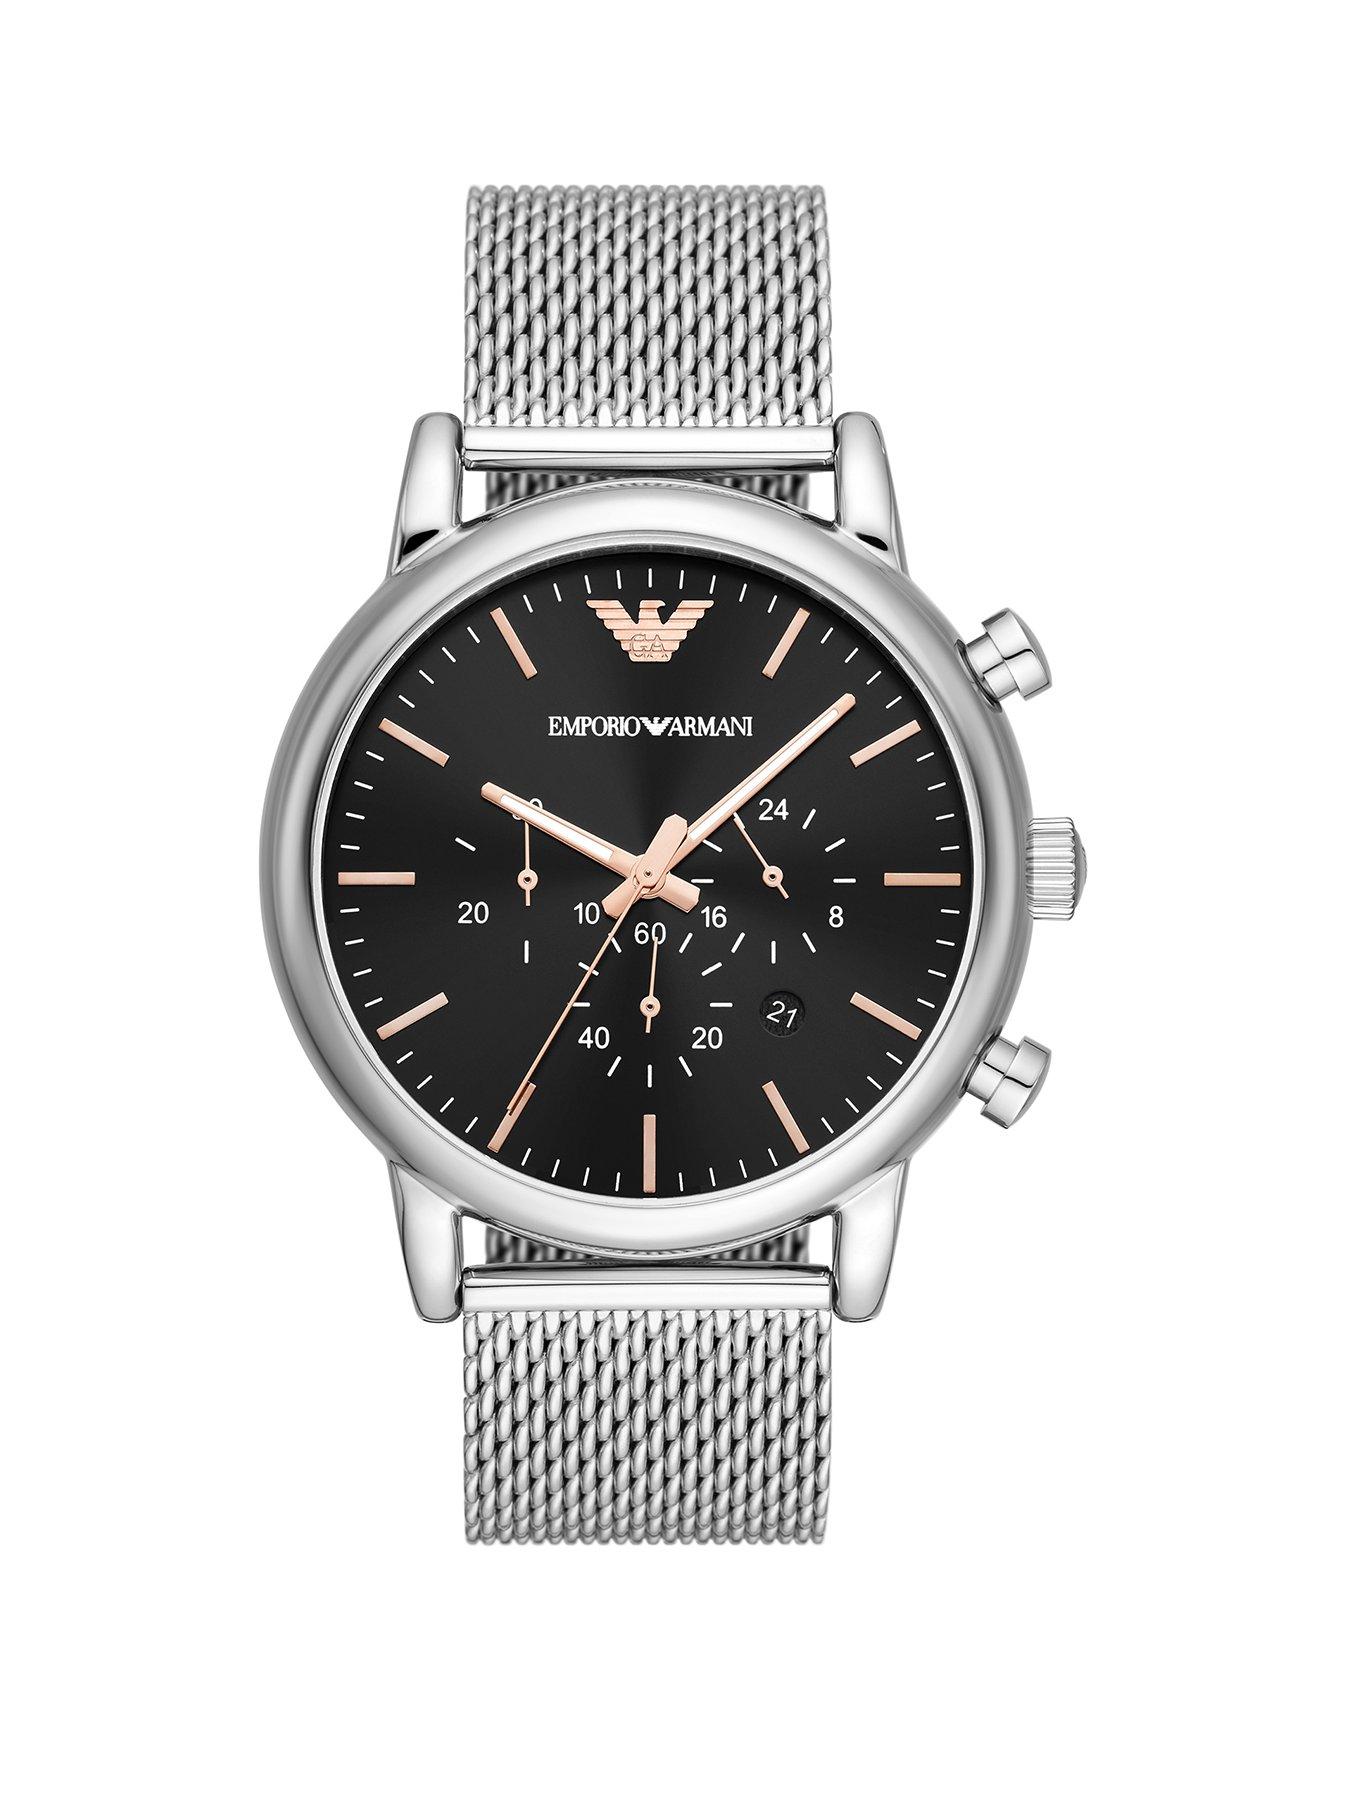 Jewellery & watches Chronograph Stainless Steel Watch